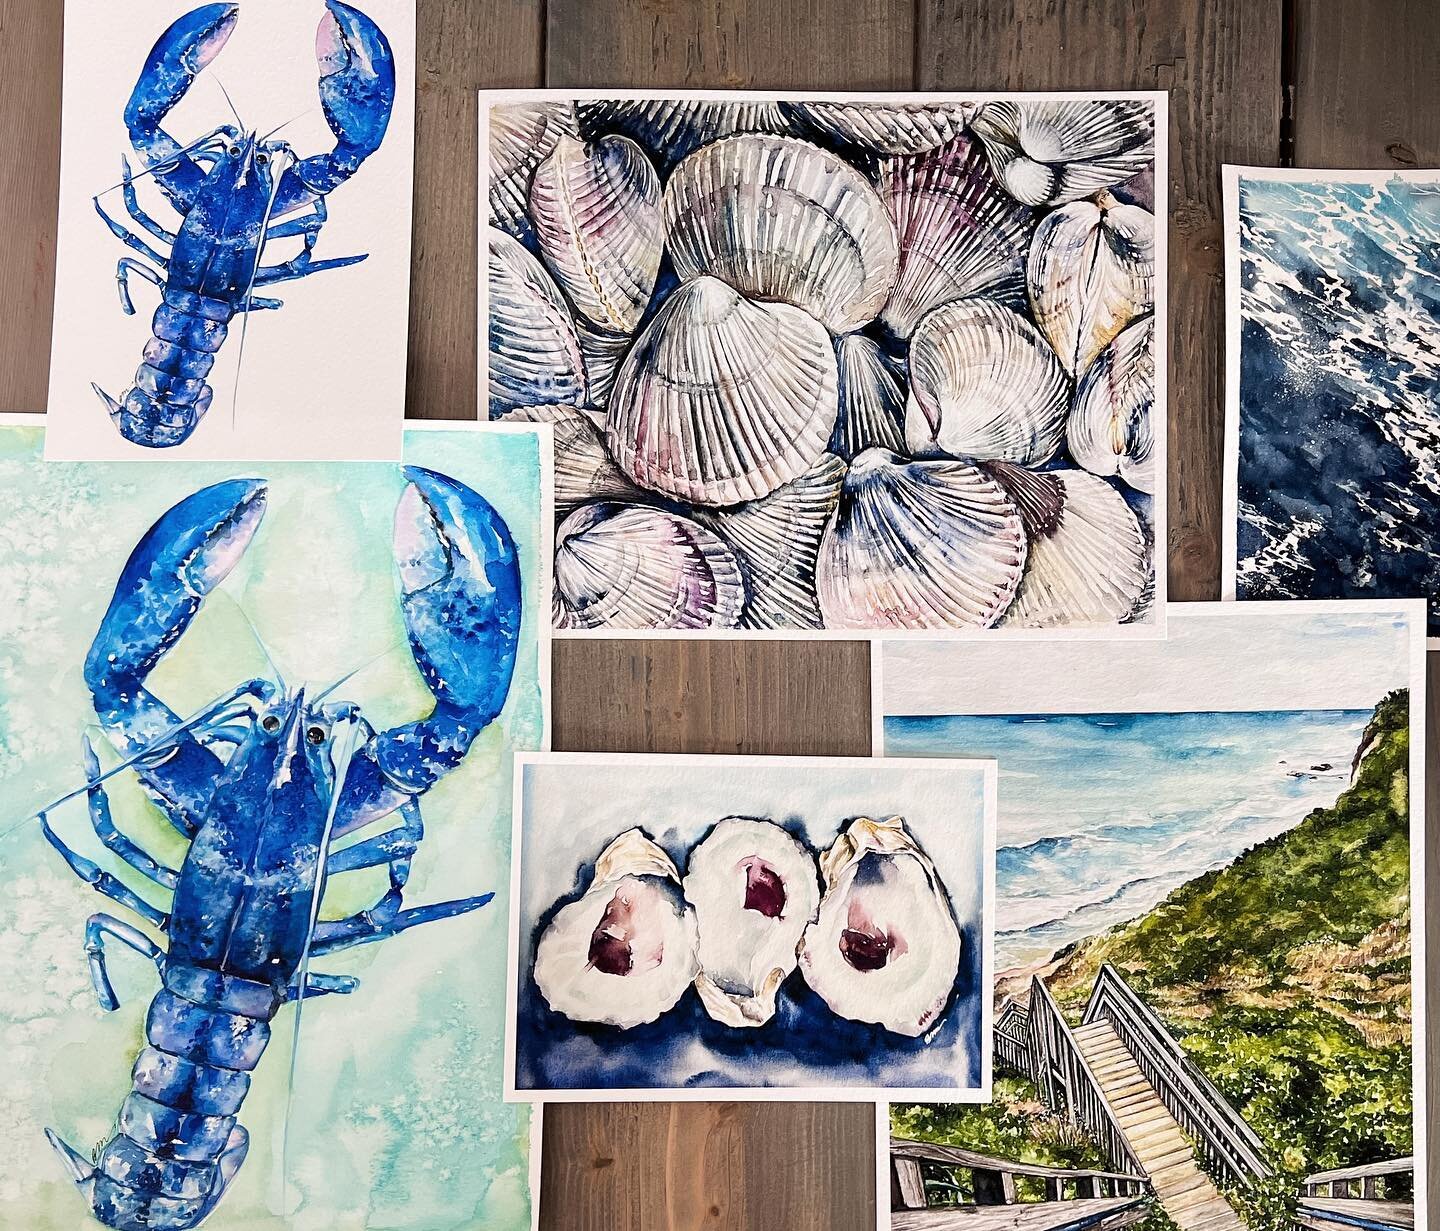 Dear Summer,

I&rsquo;m not ready. Just not ready to switch gears to fall art. 

Yours truly,
A forever summer baby.

Also, lobster with background? Or no background? 
.
.
.
.
.
.
.

#madeinrhodeisland #rhodylife #rhodylove #madeinnewengland #newengl